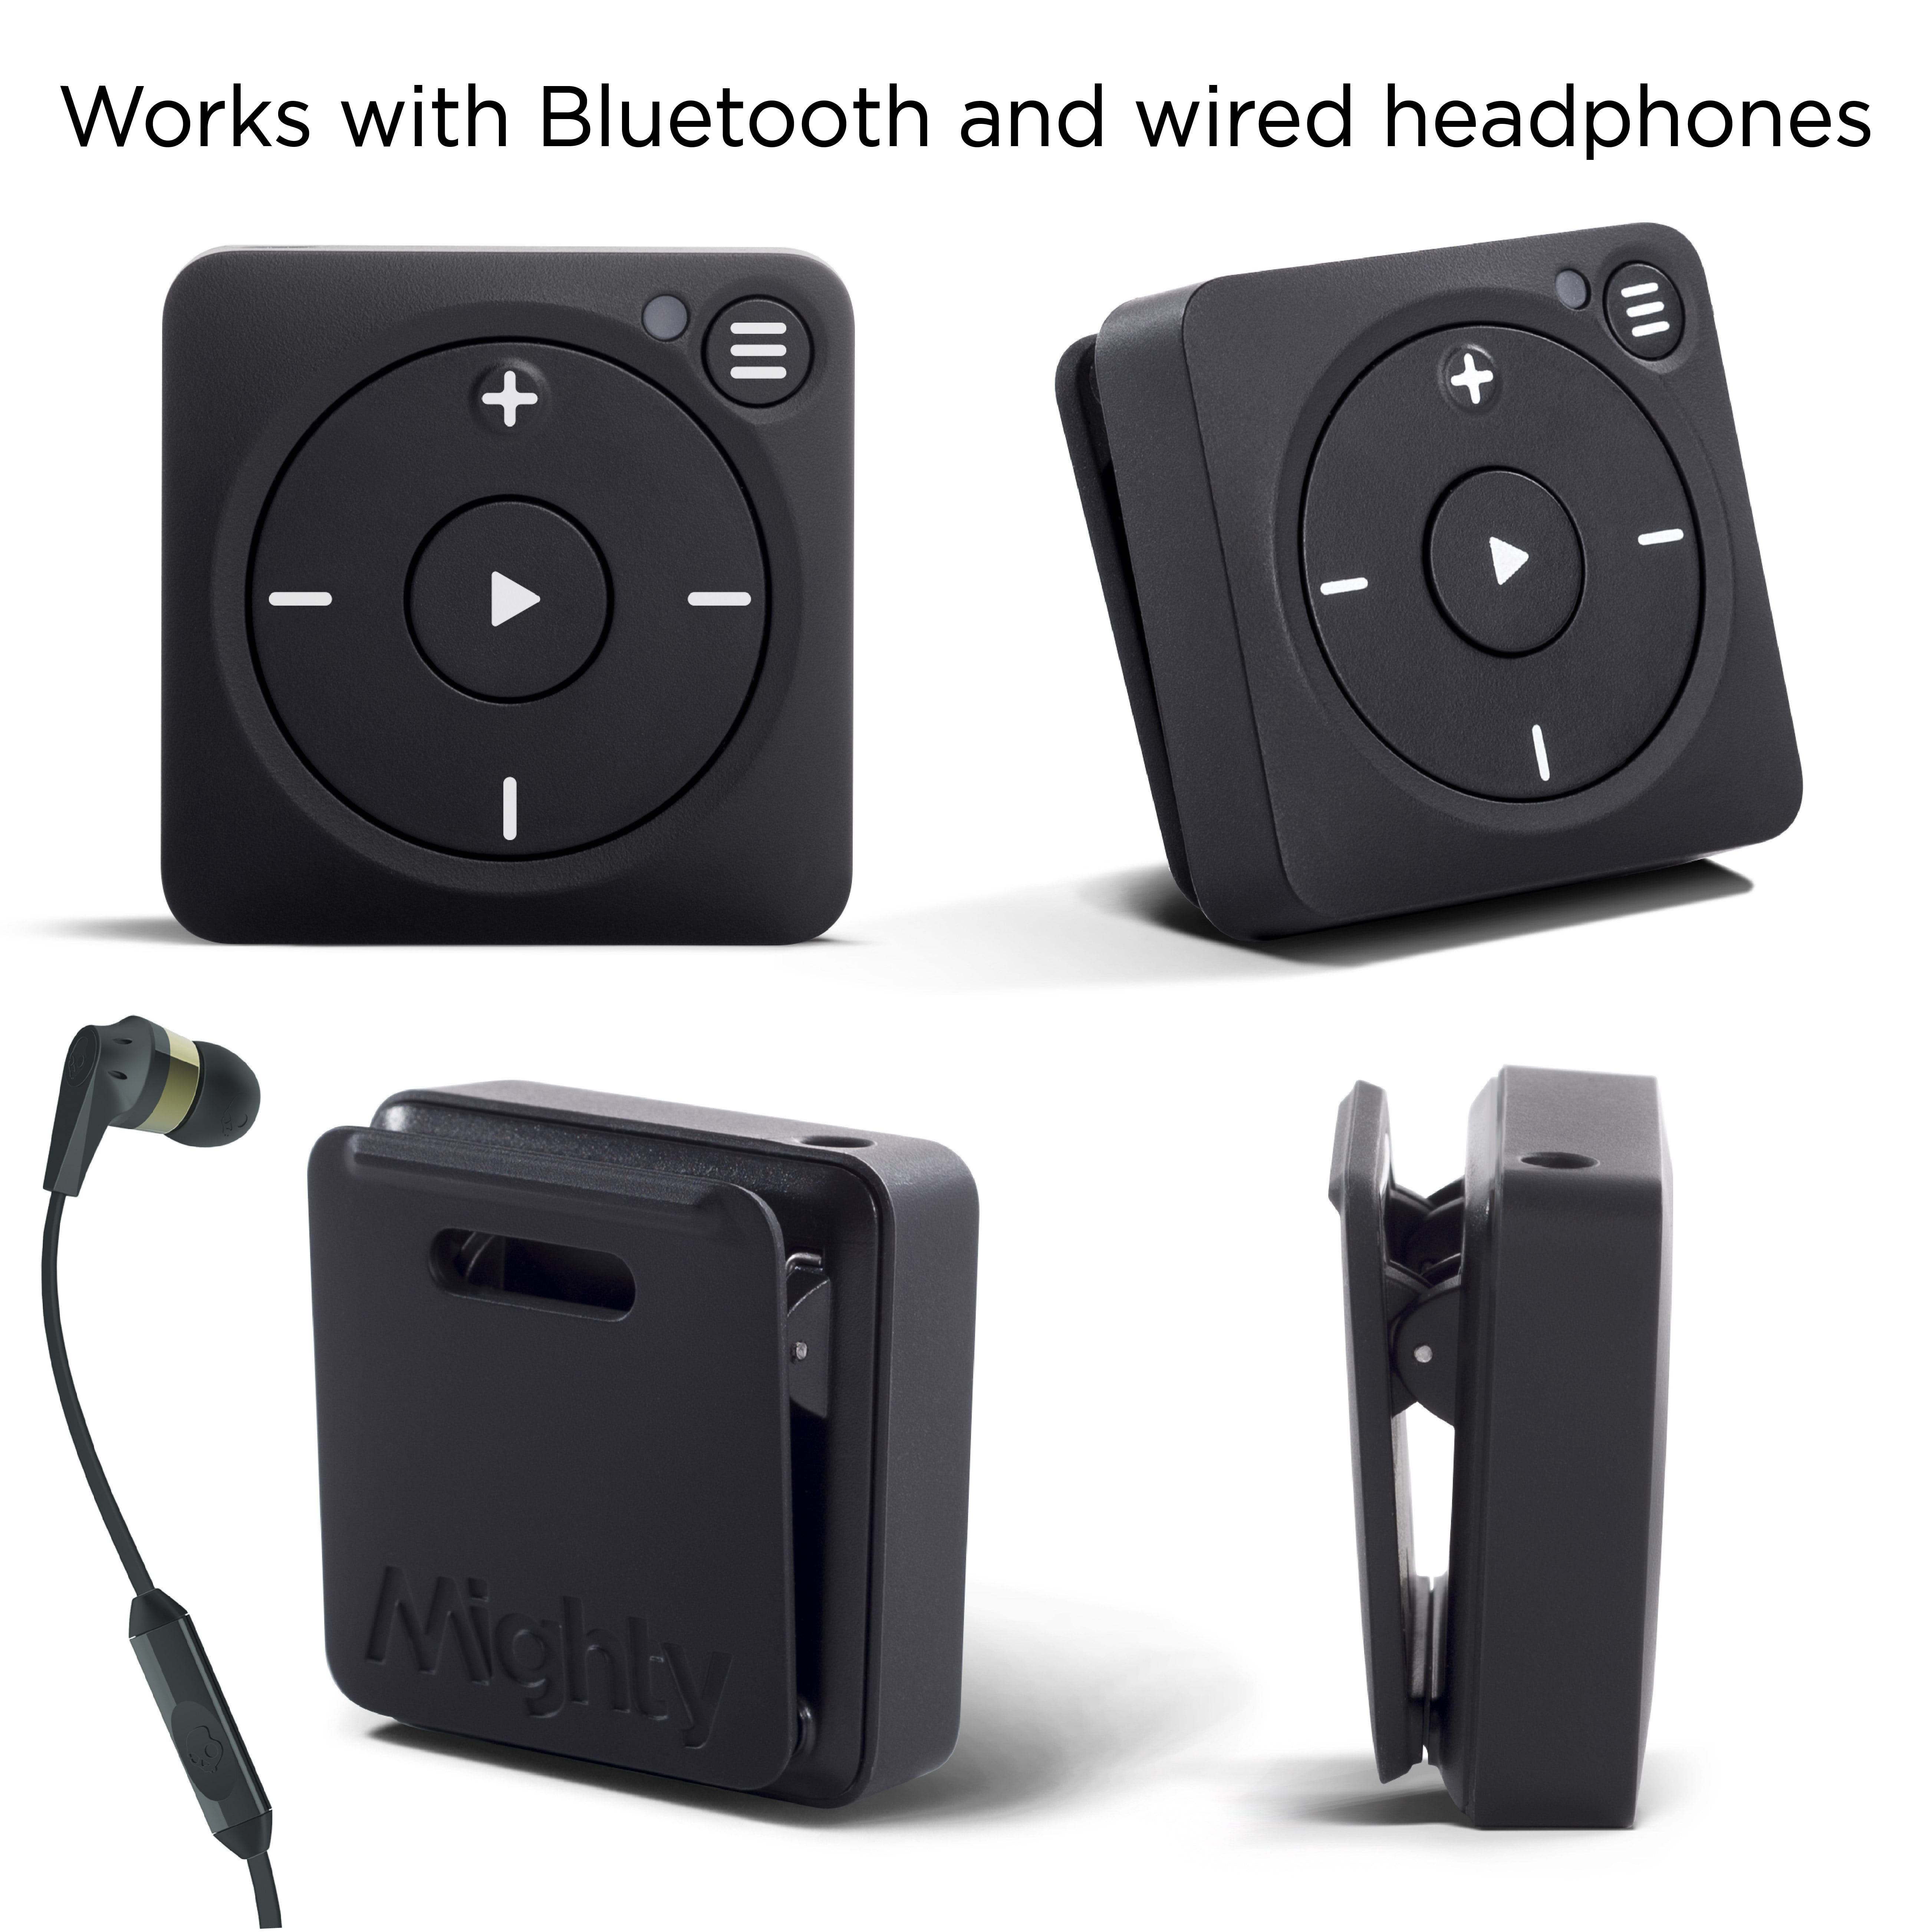 Zazzy Black Mighty Vibe Spotify Music Player Bluetooth & Wired Headphones 8GB Storage No Phone Needed 